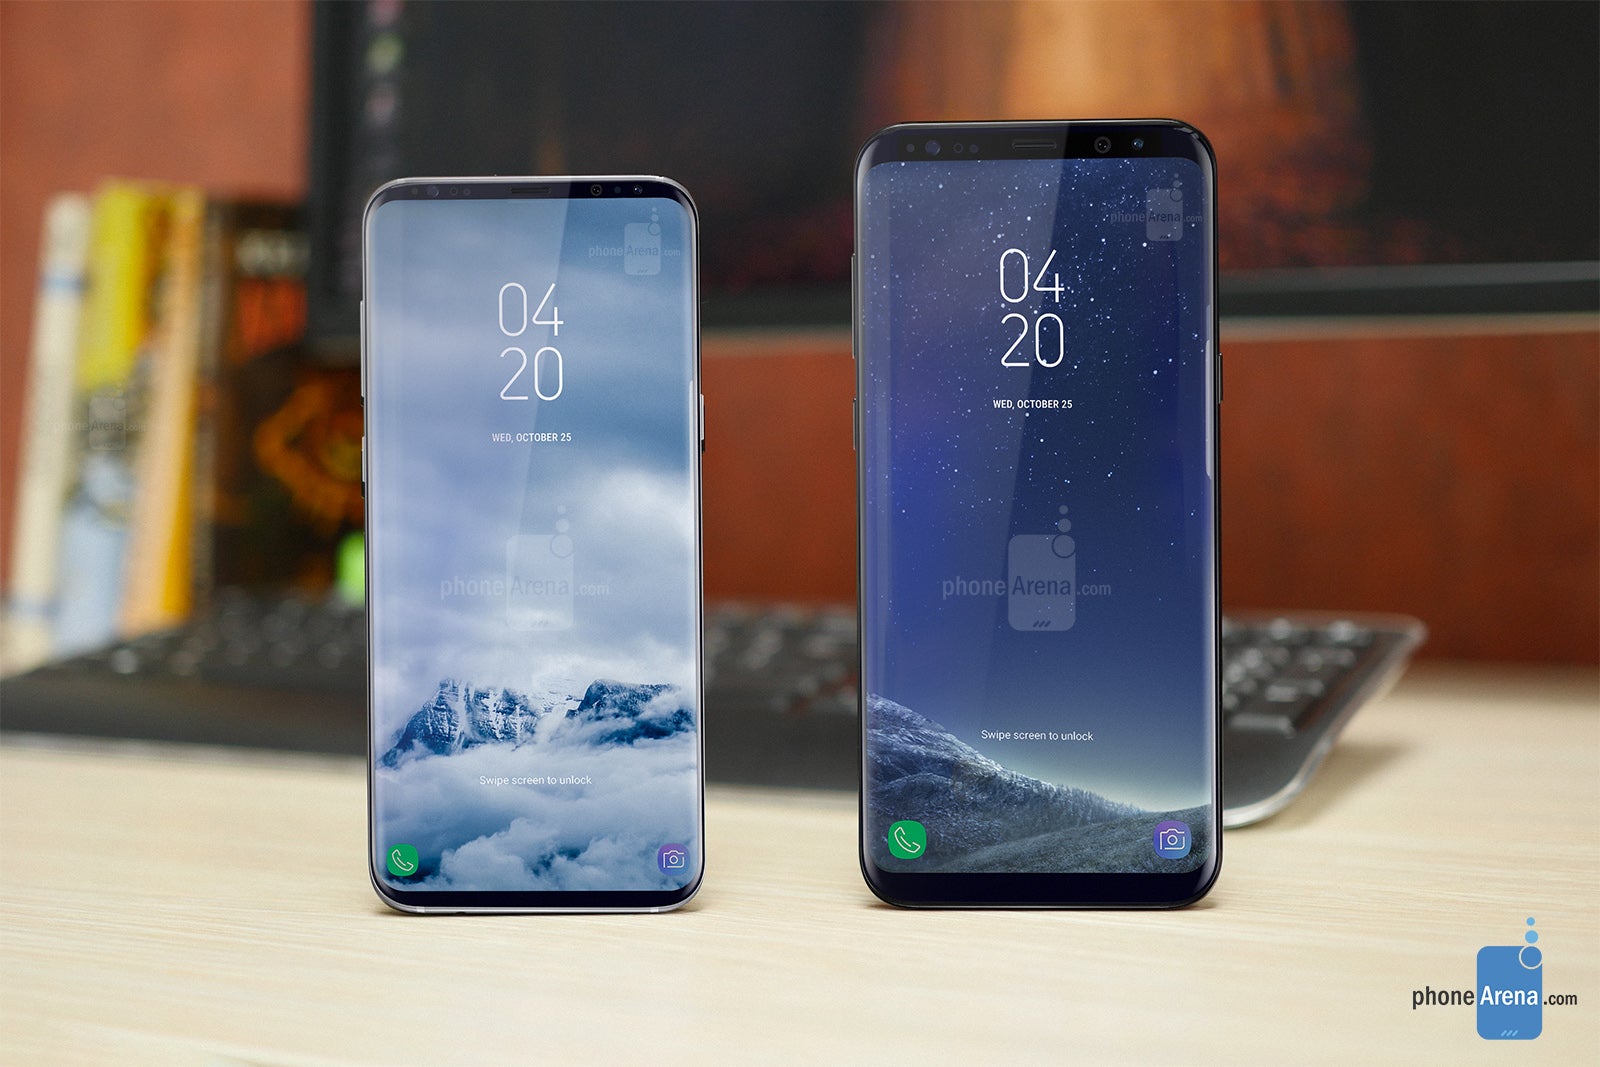 Galaxy S9 concept (left) next to a Galaxy S8+ - Samsung Galaxy S9 to come with extremely high screen-to-body ratio, rumor claims